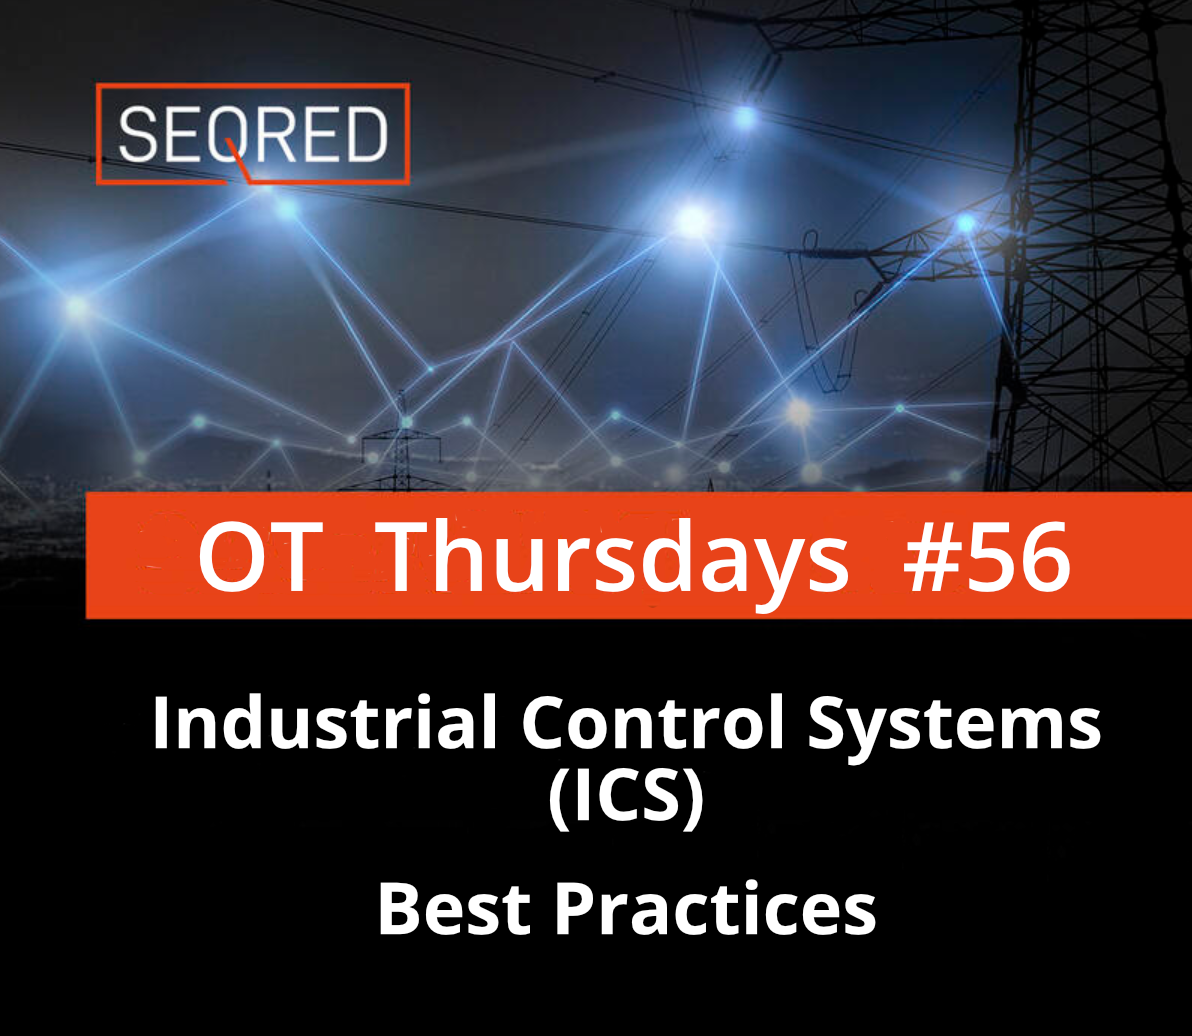 Industrial Control Systems Best Practices